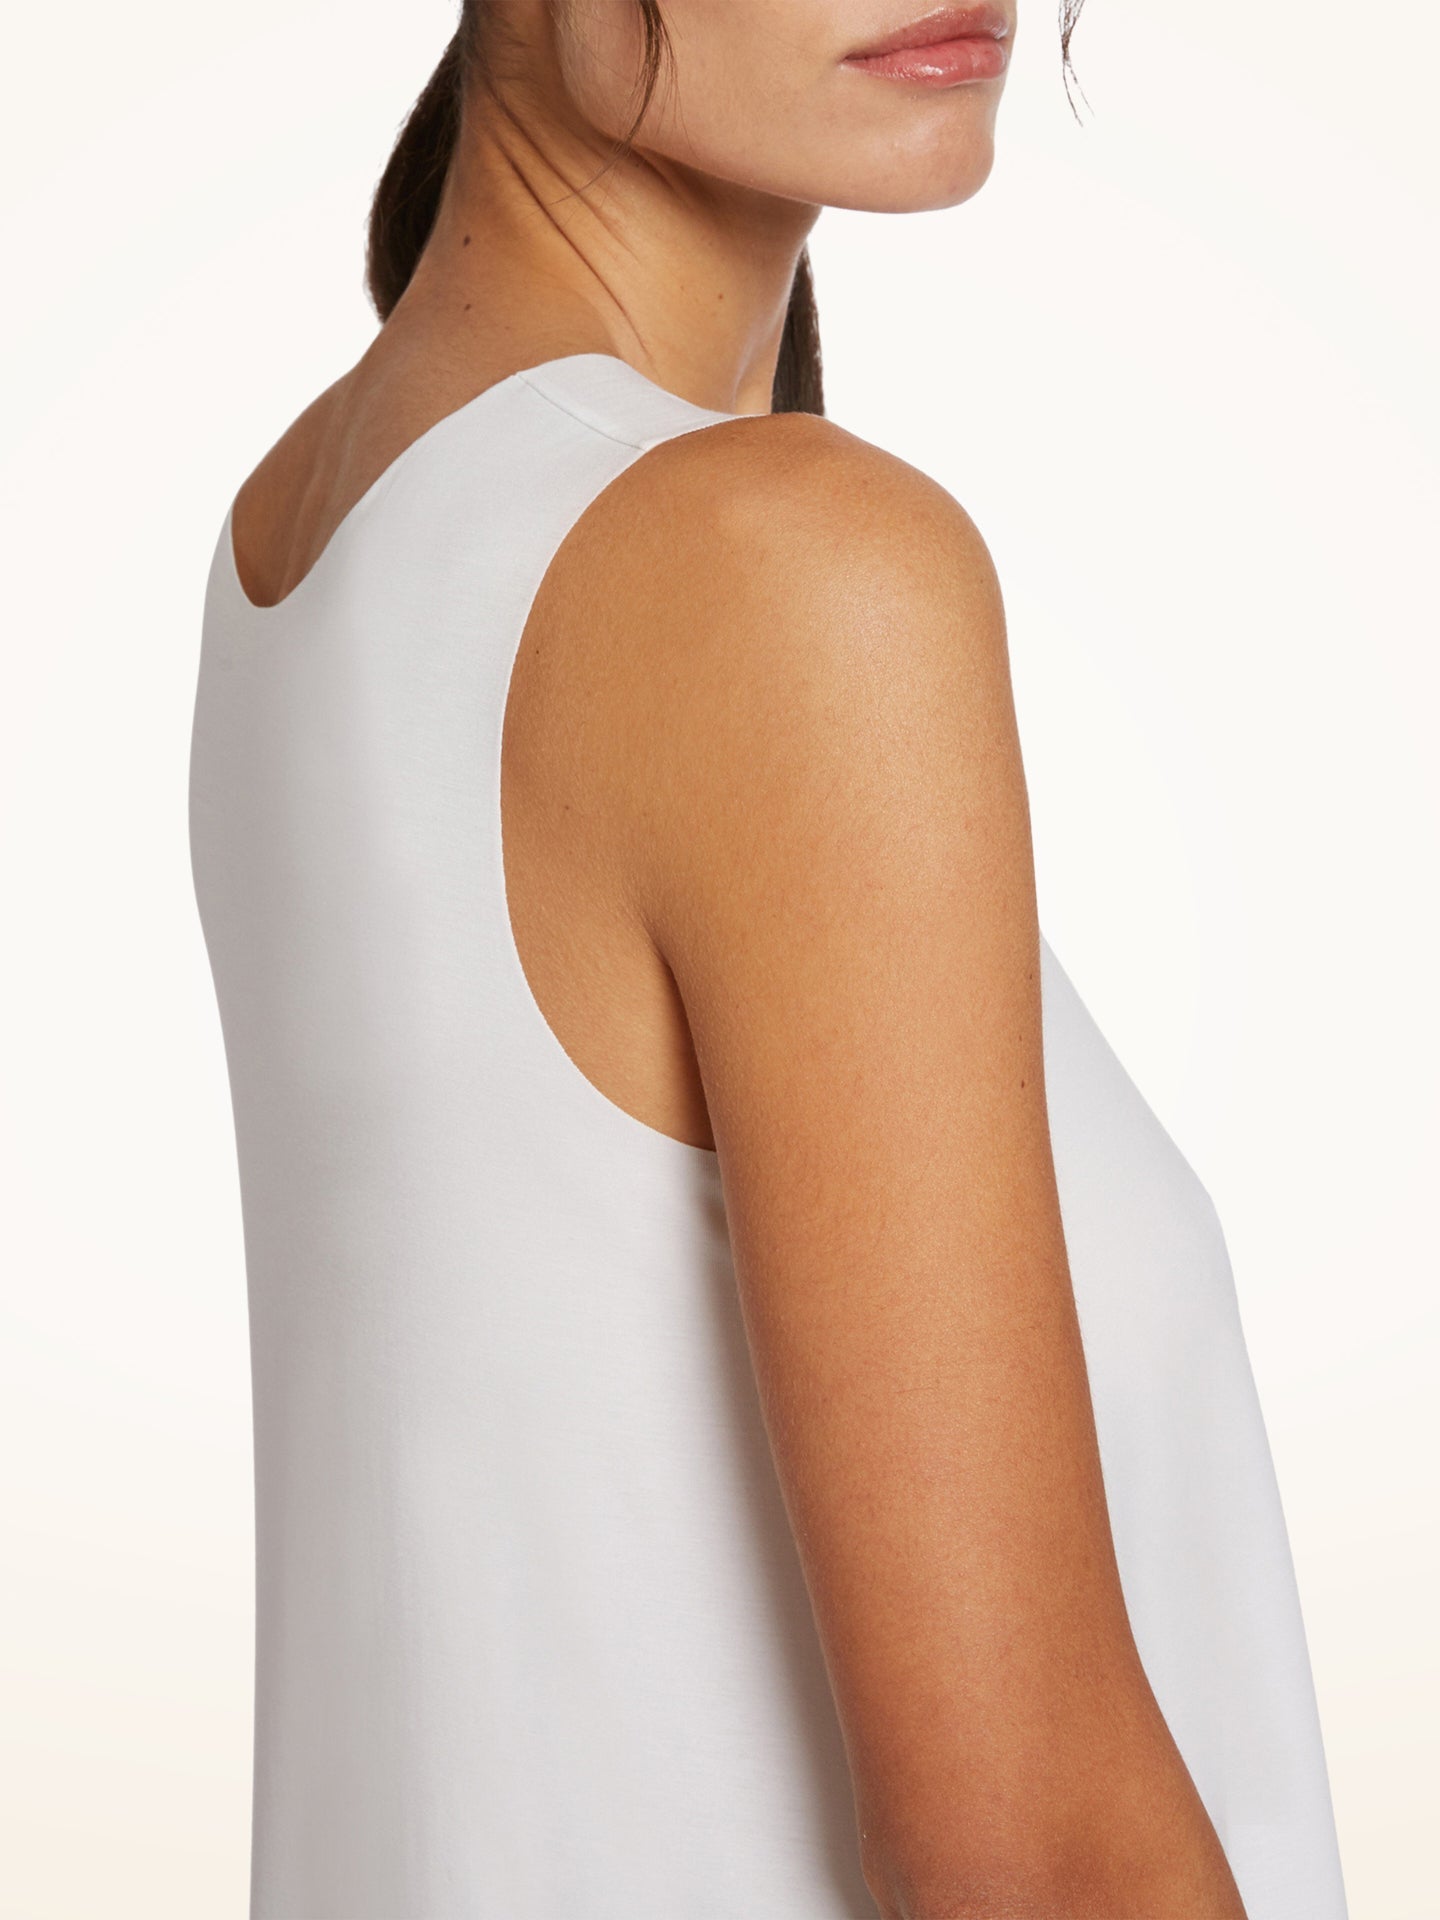 Aurora Pure Top Sleeveless-Shirts-Wolford-OUTLET-ARCHIVIST